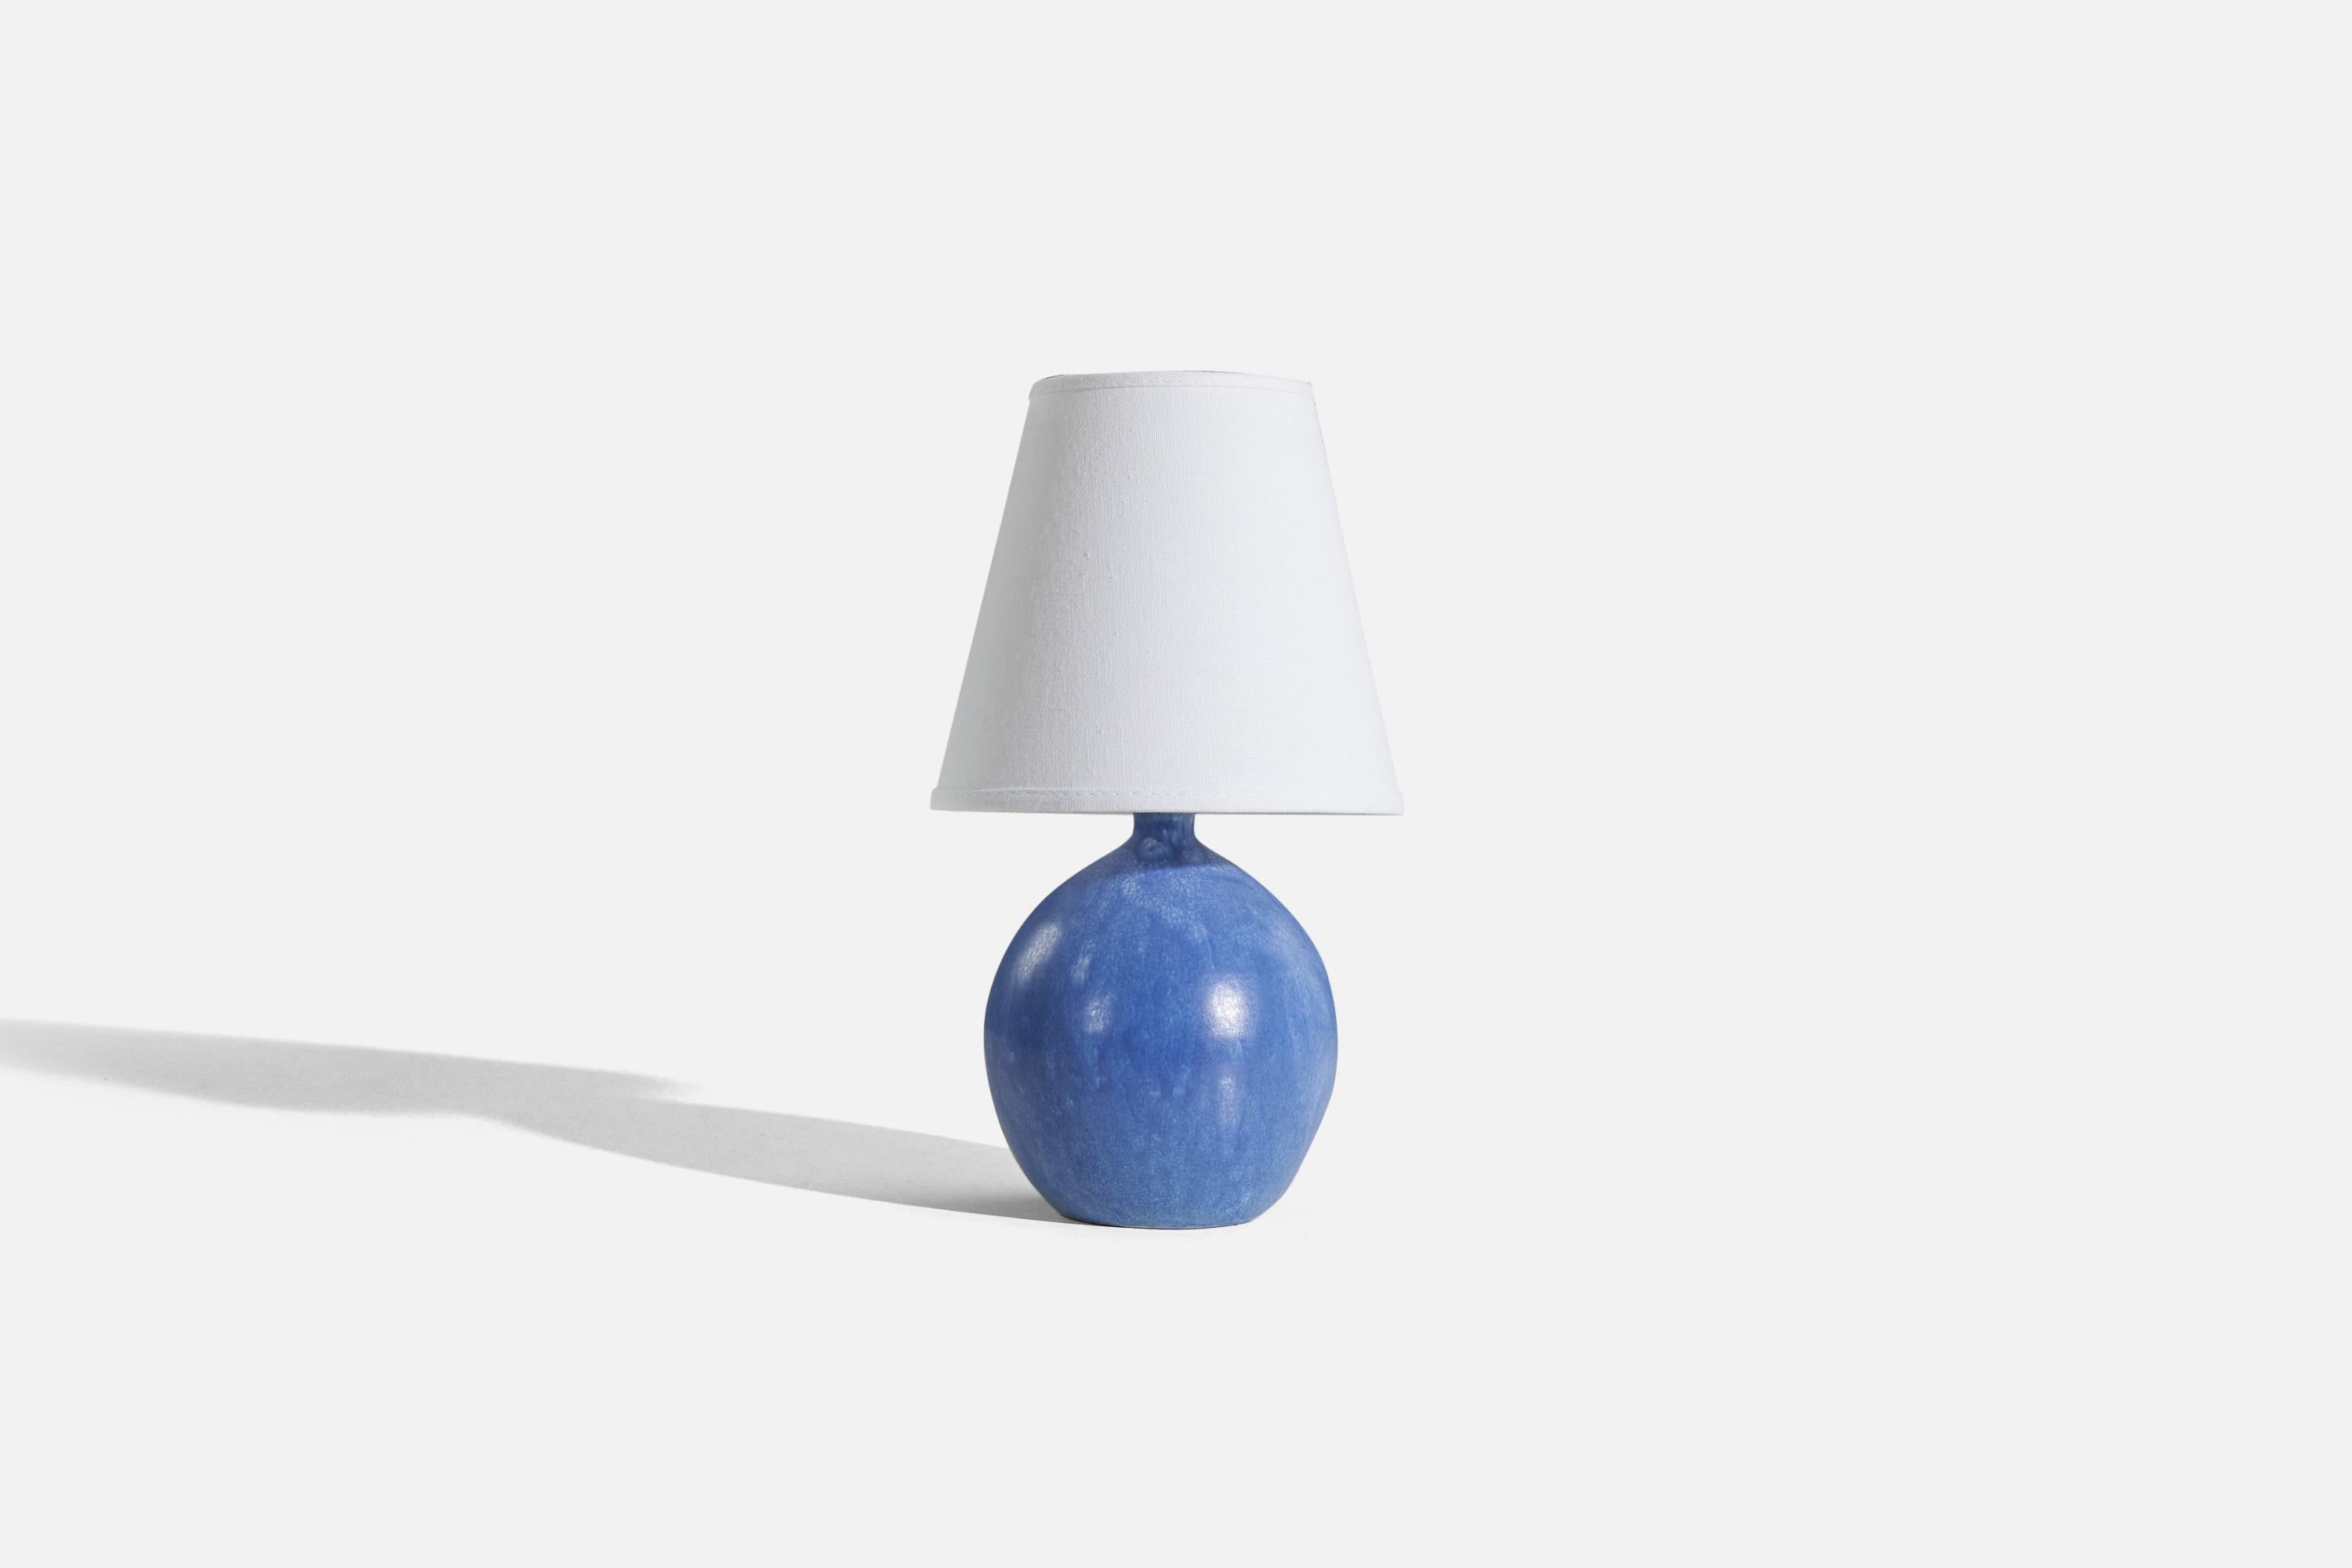 A blue, glazed stoneware table lamp designed by Martin Flodén and produced by his studio, Arvika, Sweden, c. 1940-1950s. 

Sold without lampshade. 
Dimensions of Lamp (inches) : 825 x 5 x 5 (H x W x D)
Dimensions of Shade (inches) : 4 x 7 x 6.25 (T